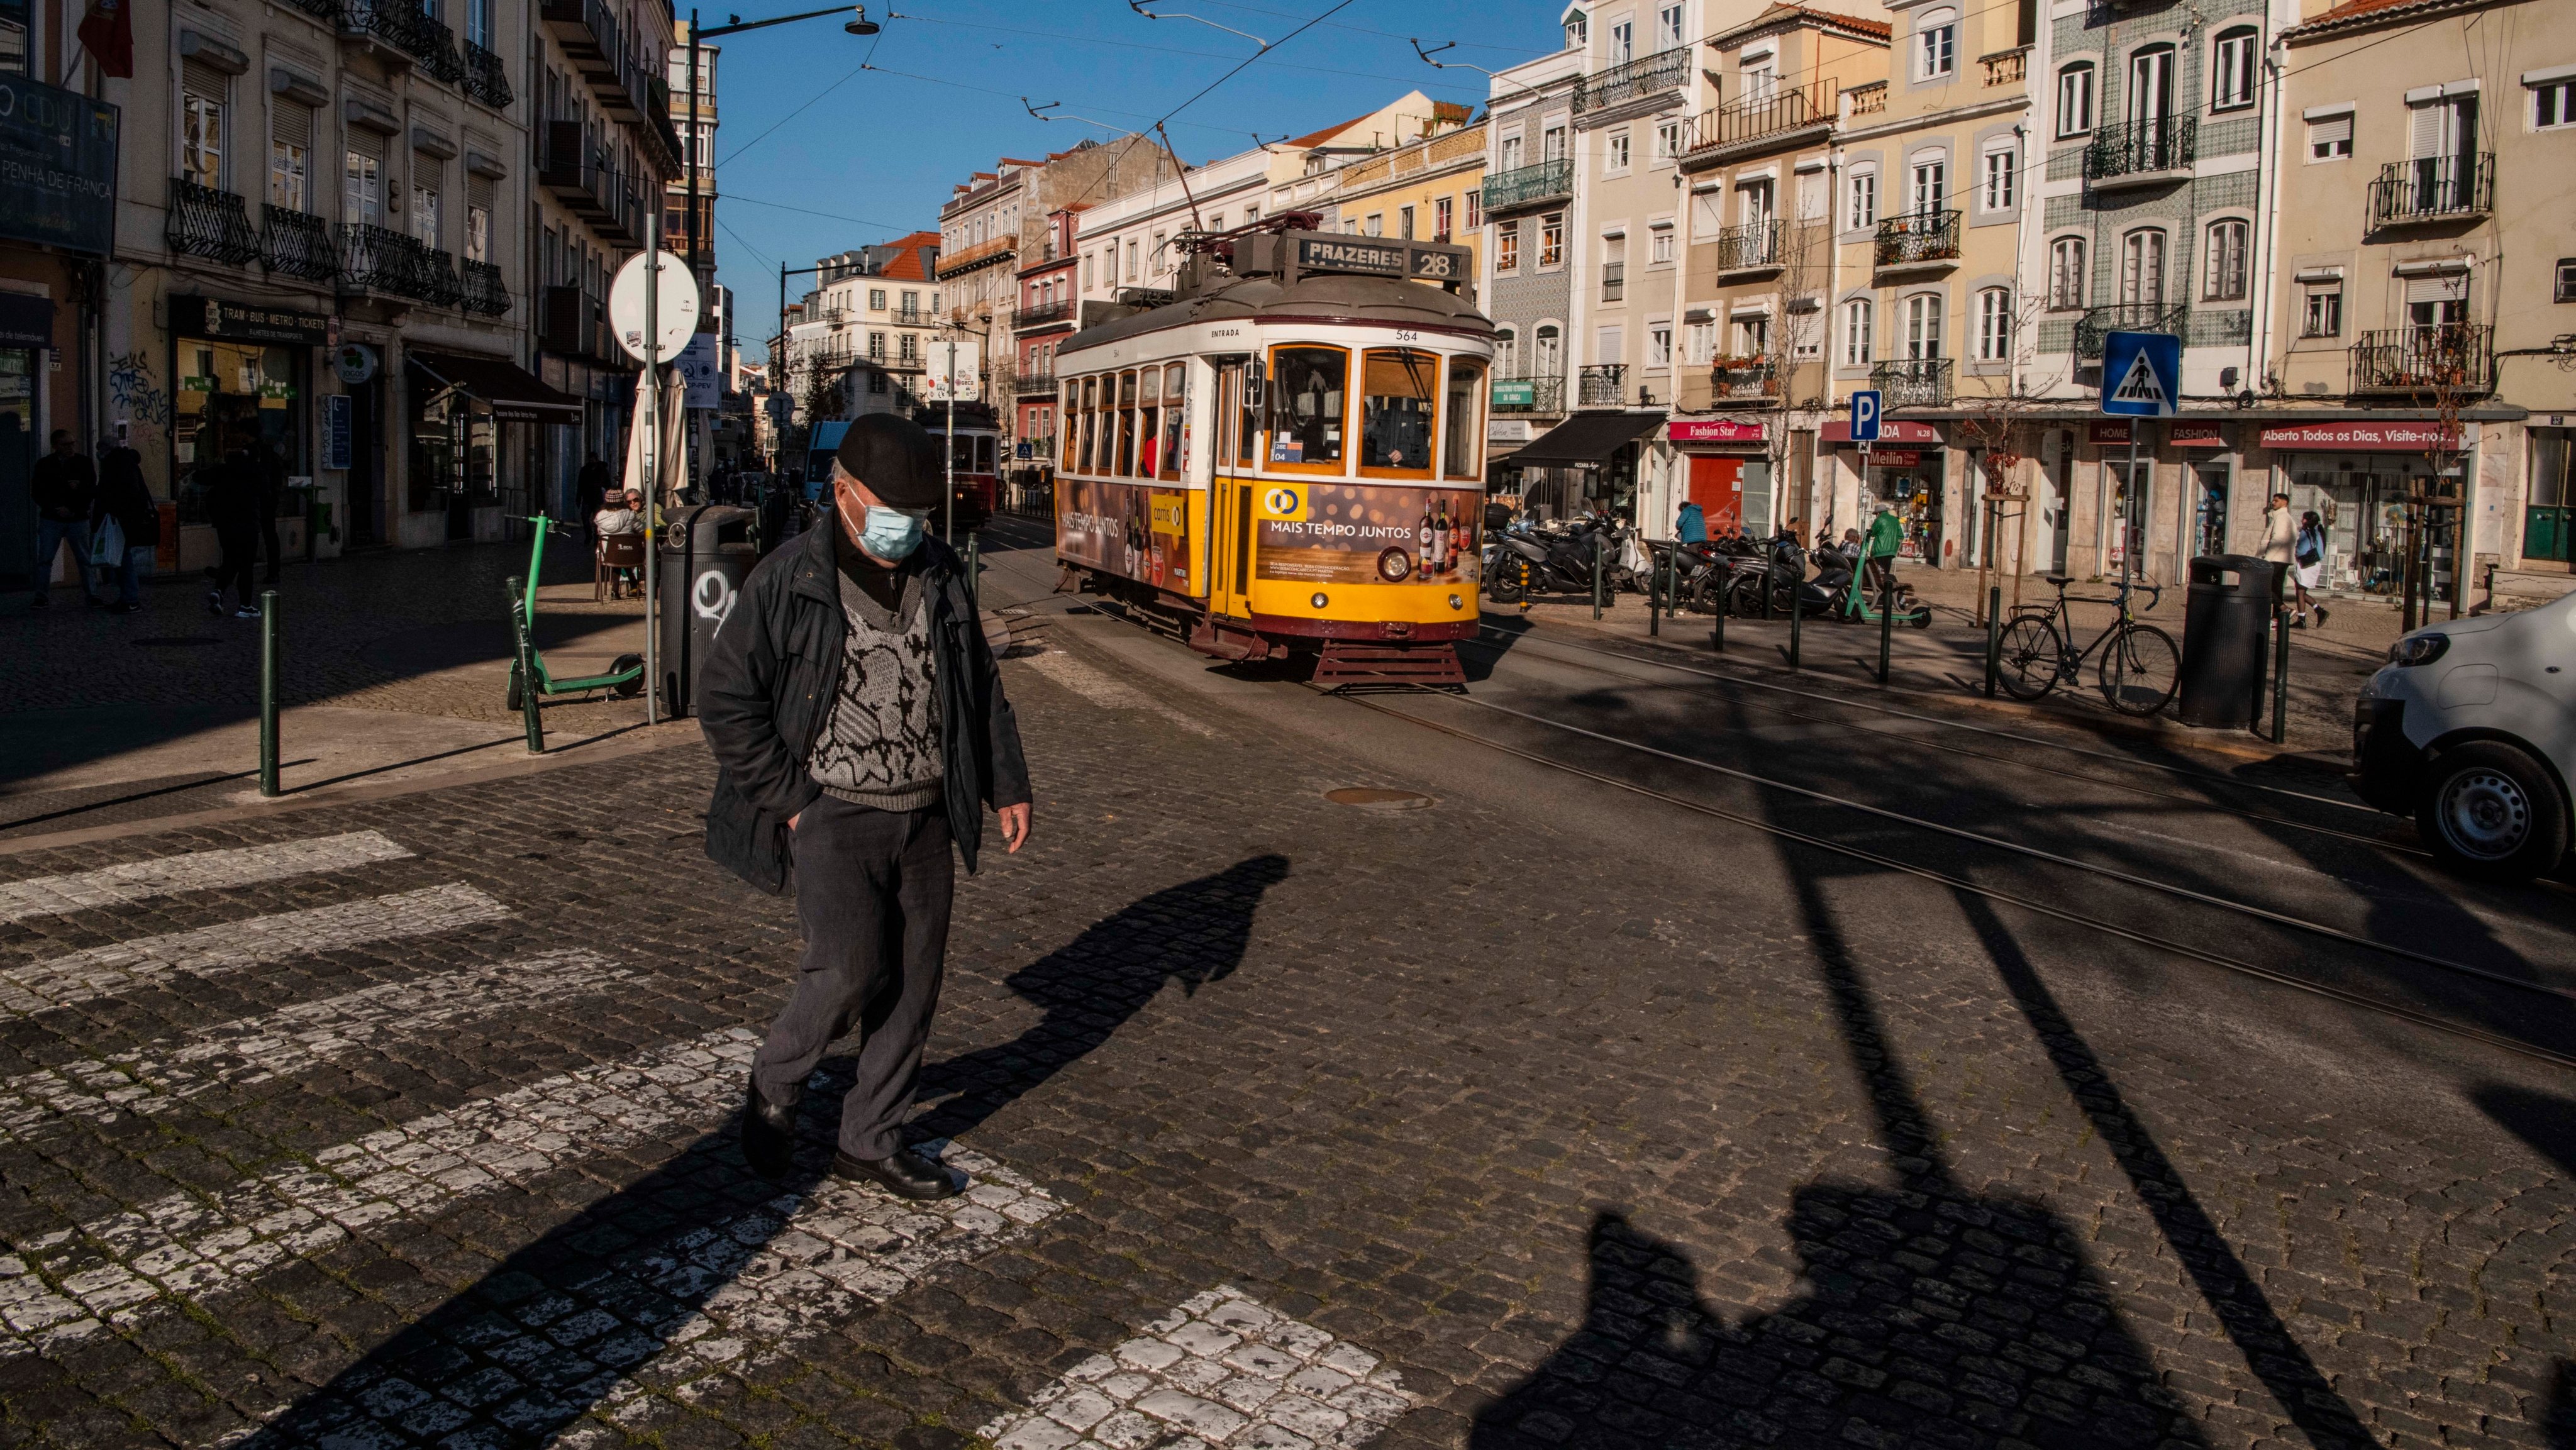 Daily Life In Lisbon Amid COVID-19 Pandemic